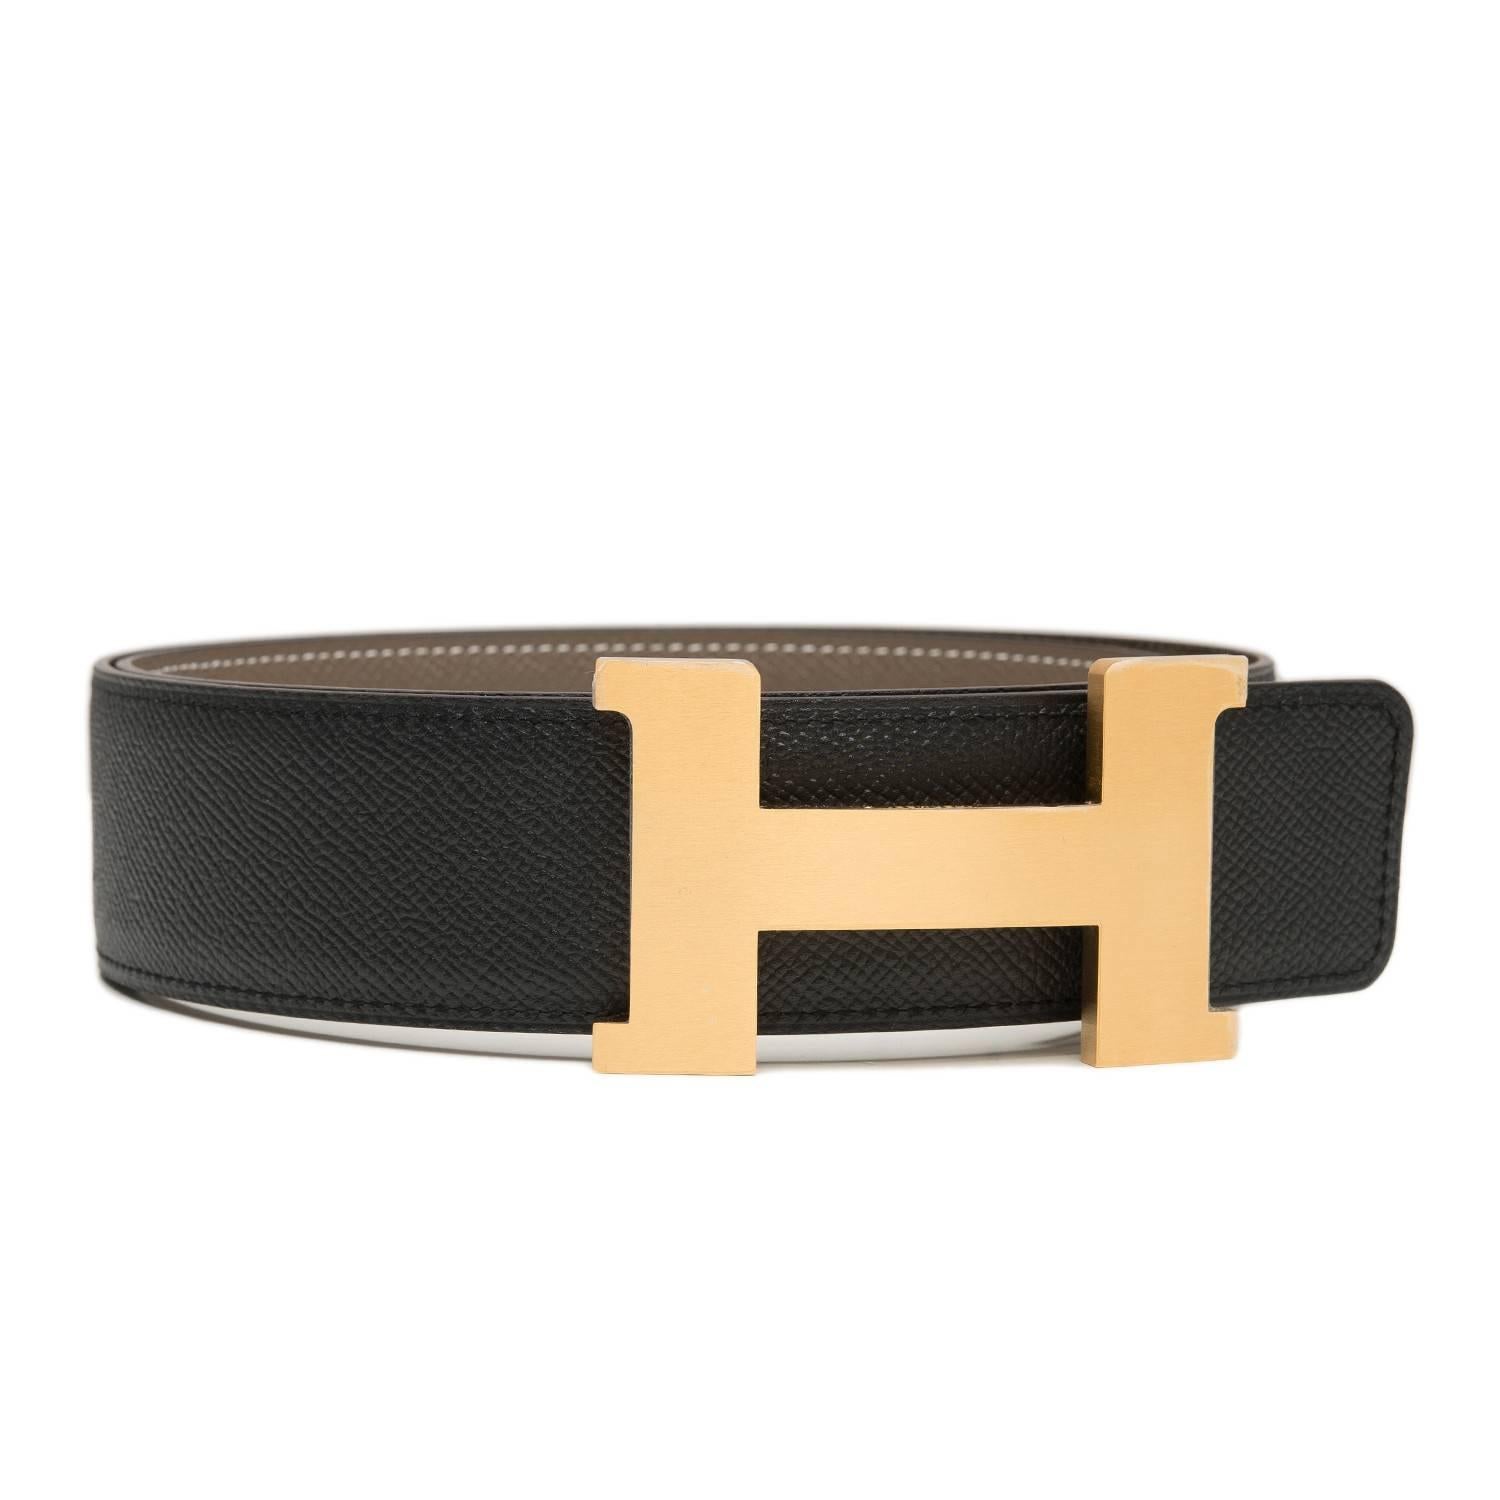 Hermes belt kit comprising an adjustable wide 42mm Constance H belt of etoupe epsom with white contrast stitching reversing to black epsom with tonal stitching and accompanied by a removable gold H buckle. 

Origin: France

Condition: Pristine,